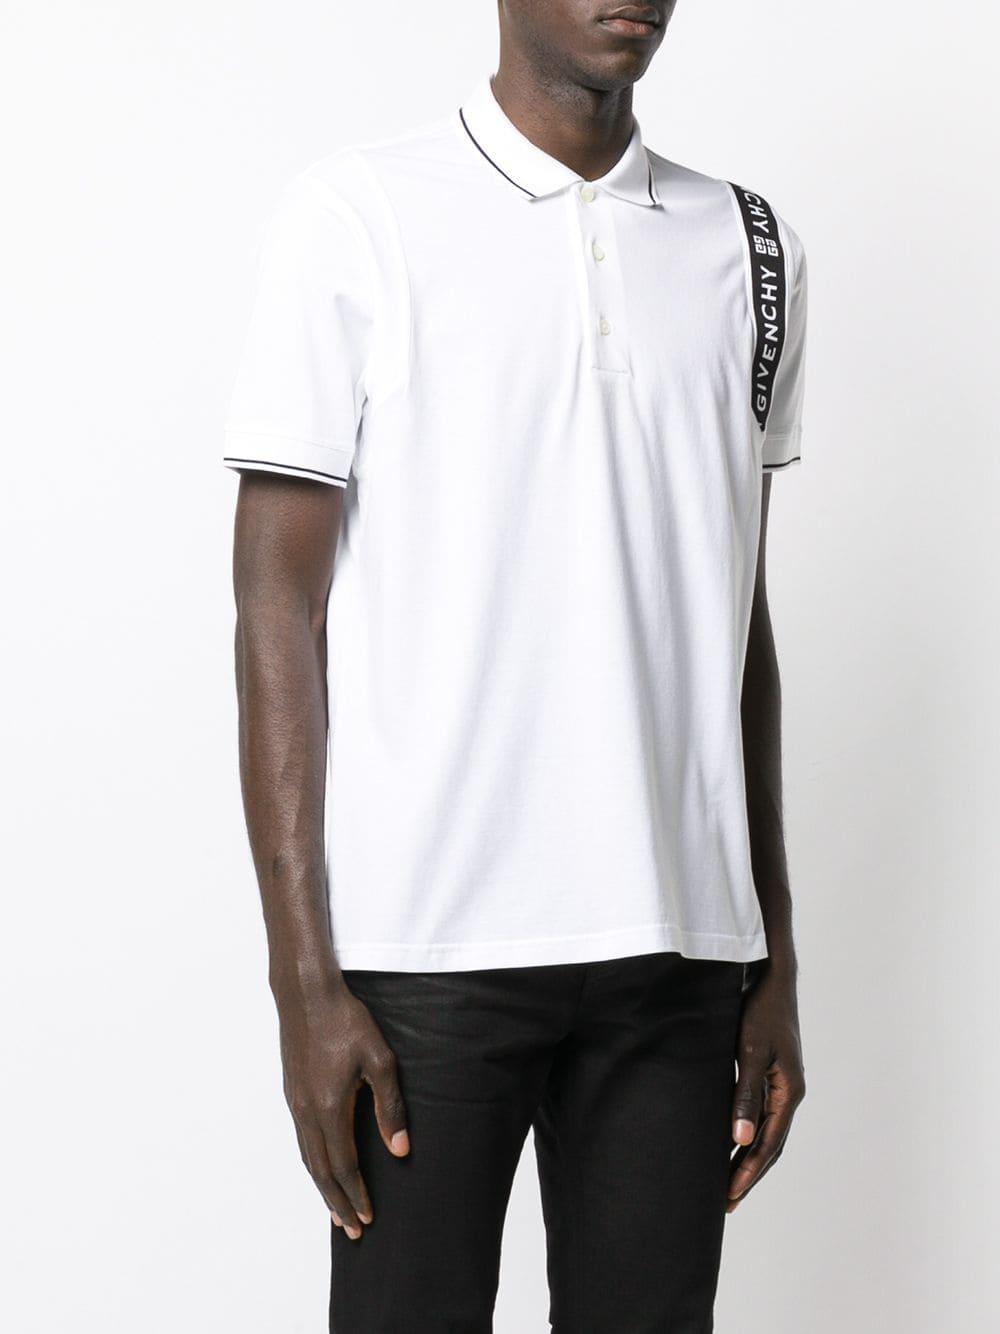 Givenchy Cotton Logo Tape Polo Shirt in White for Men - Lyst